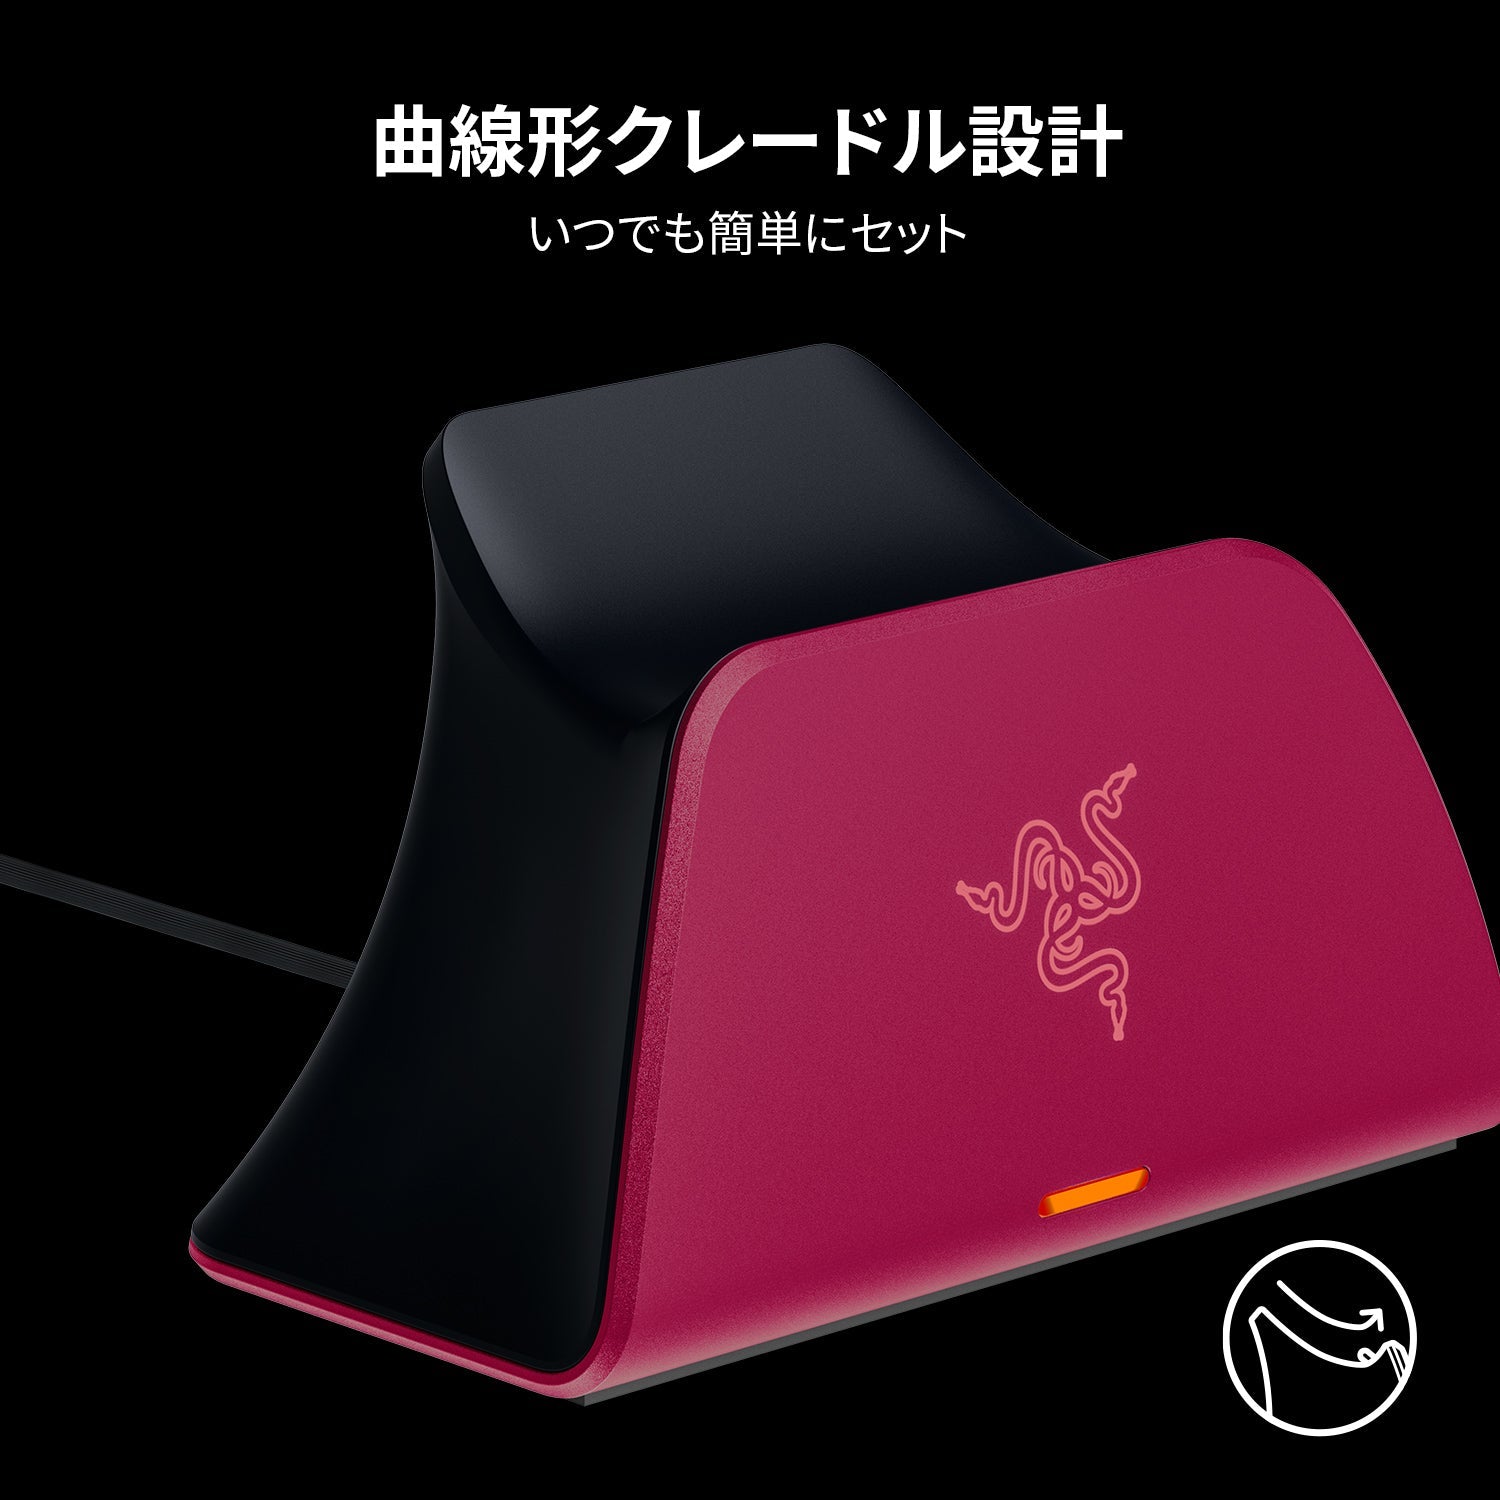 Razer Quick Charging Stand for PS5 (Pink) クイック チャージング スタンド フォー ピーエスファイブ ピンク thumbnail 3